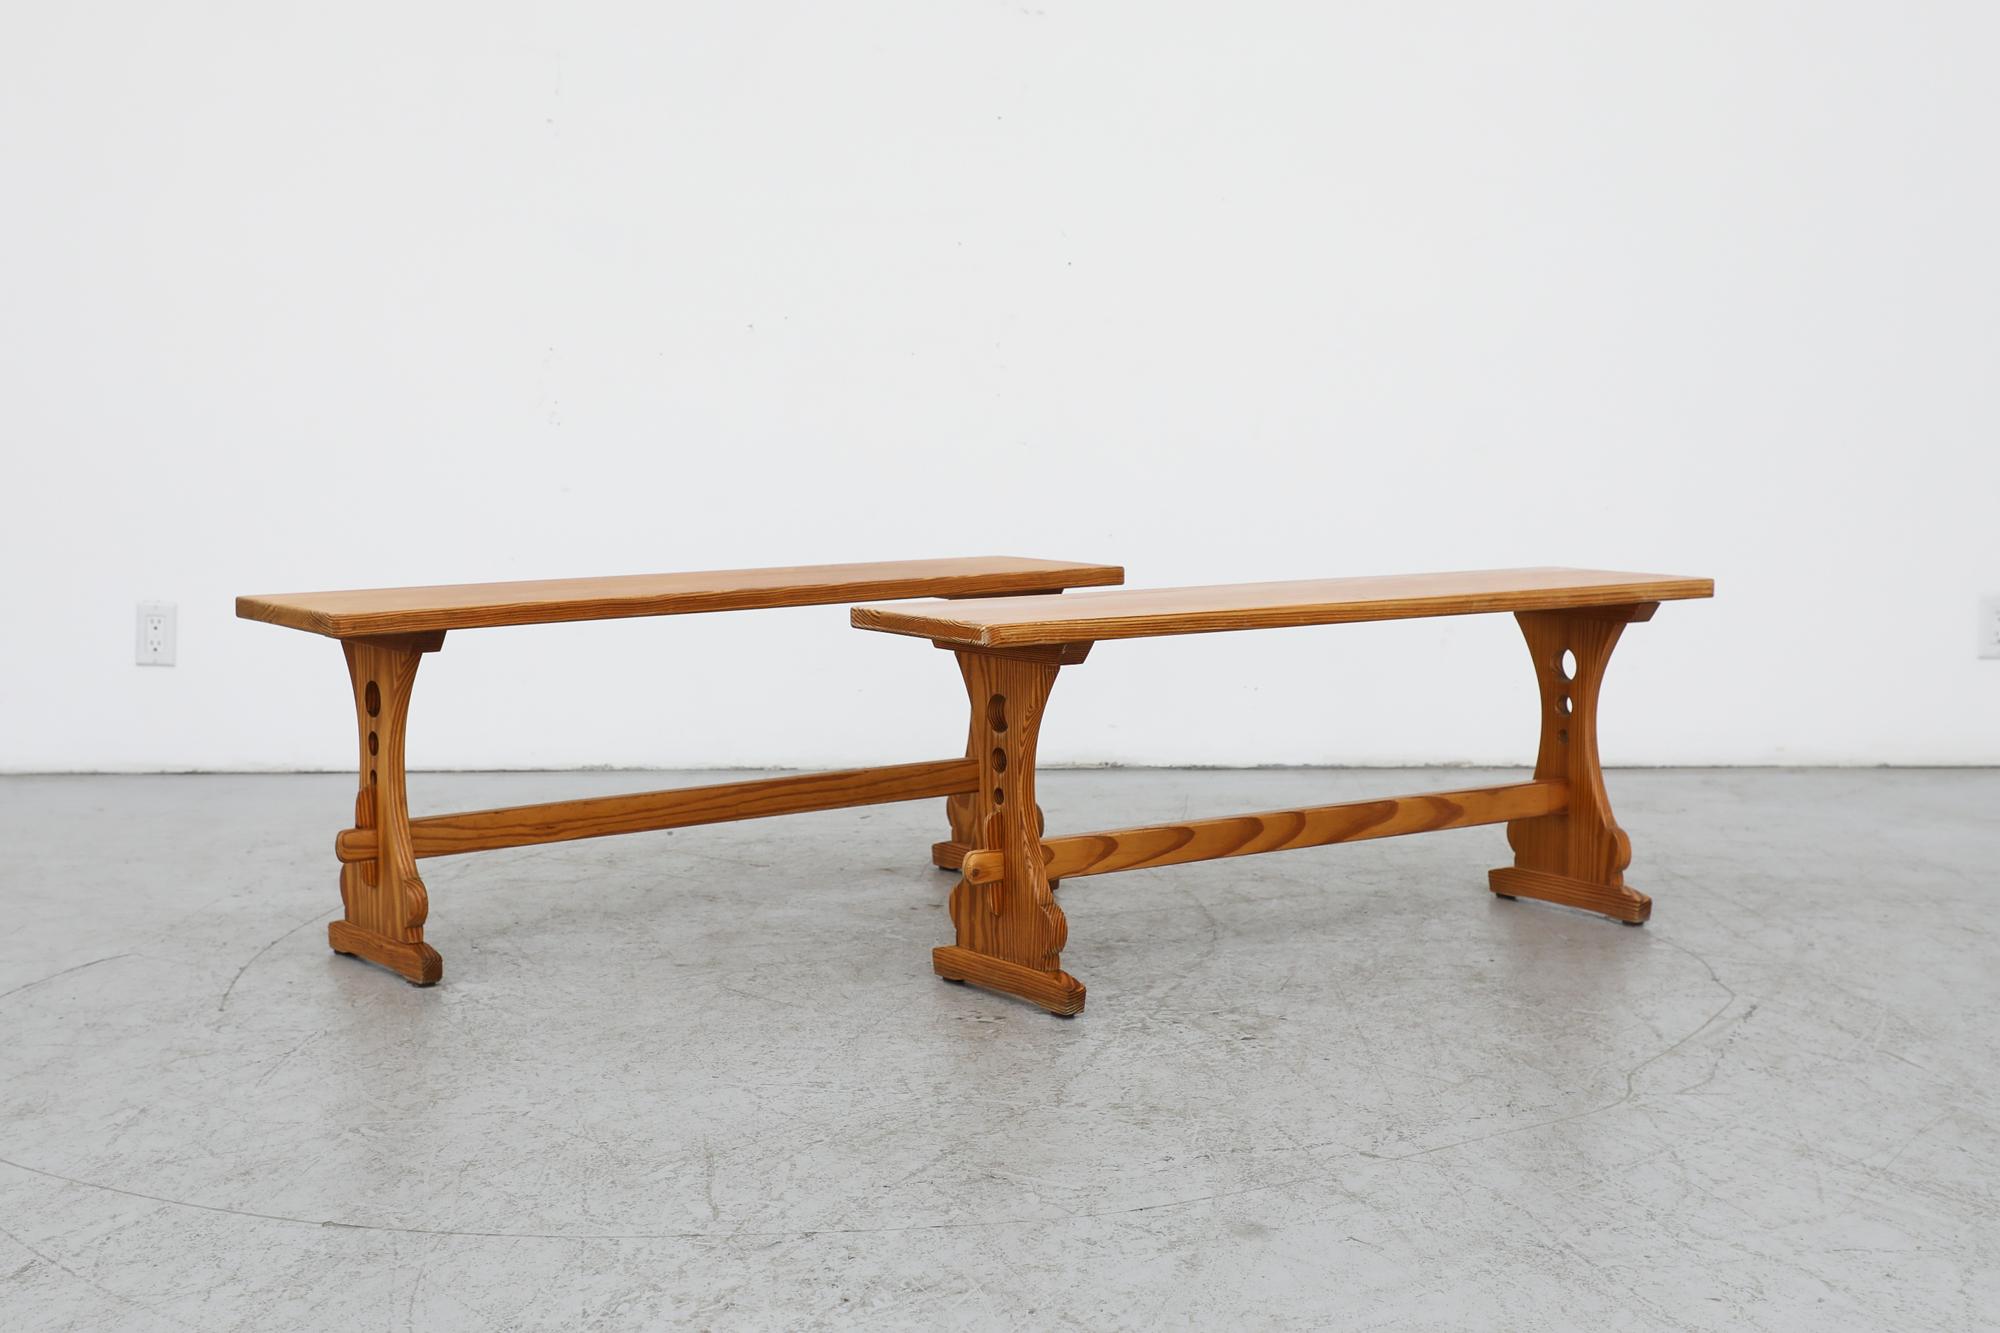 Mid-Century Tyrolean style pine benches. Also known as Swiss Mountain Chairs or Folk Chairs, this style was first employed as peasant furniture and was named after a historical region in Central Europe. The 19th-century designs originate from a